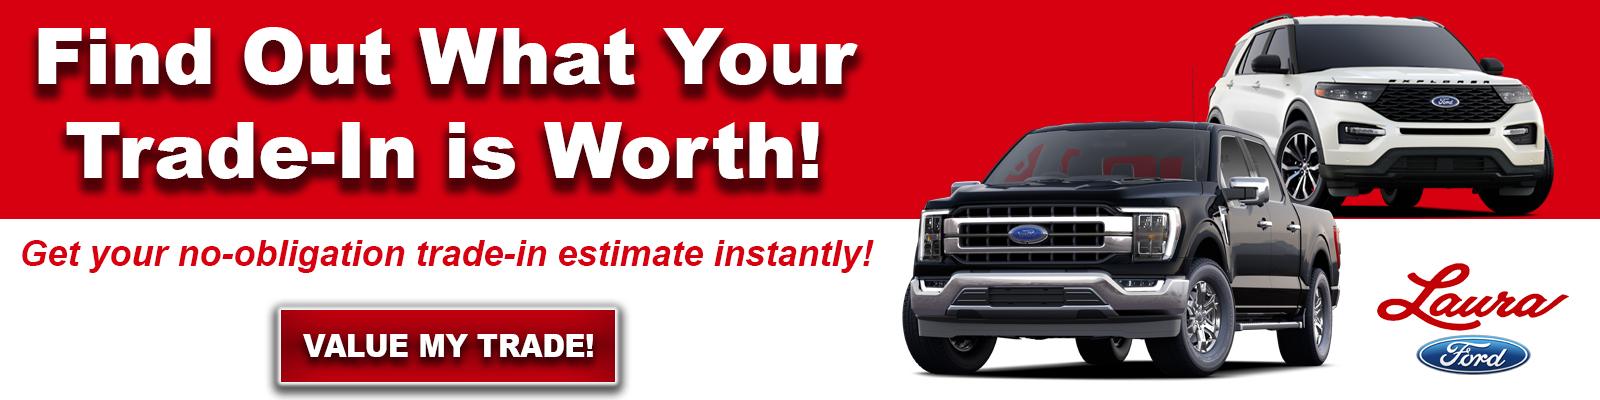 Click here to get an instant offer on your trade-in vehicle!